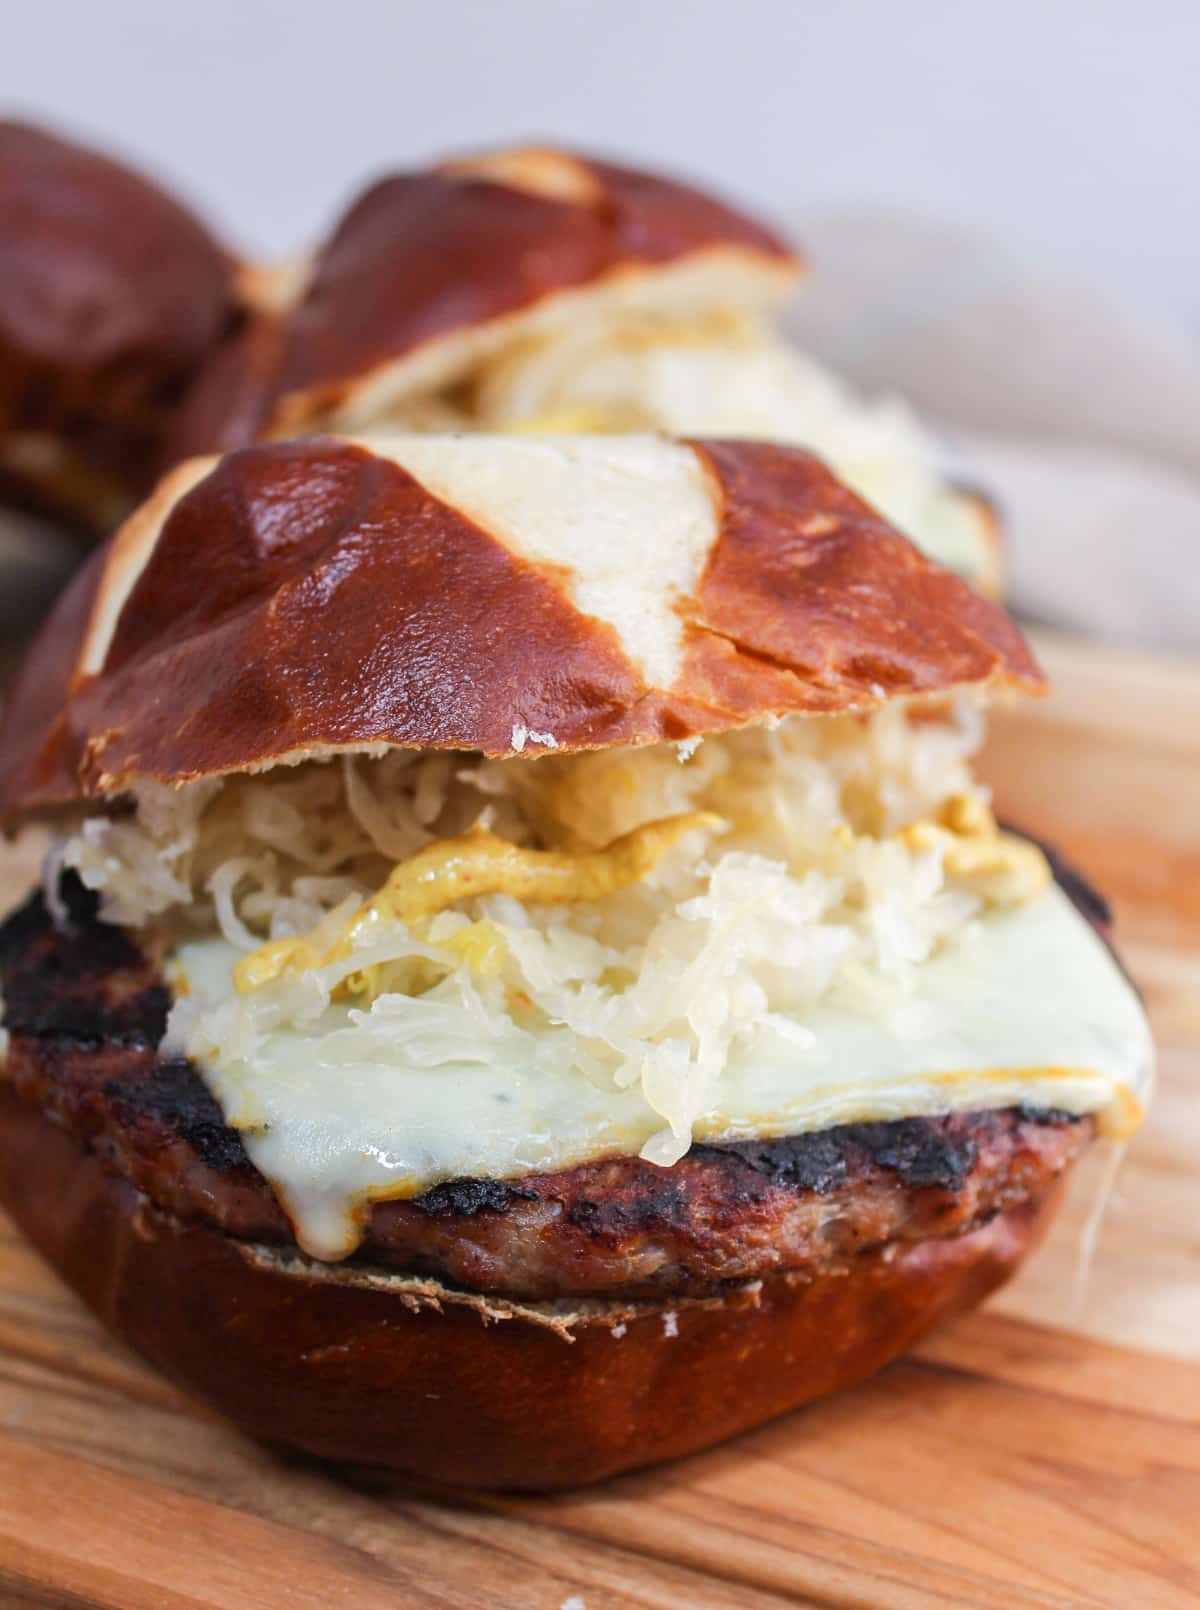 grilled brat pattie on a pretzel roll. The meat is cooked and topped with melted cheese, mustard, and sauerkraut. 